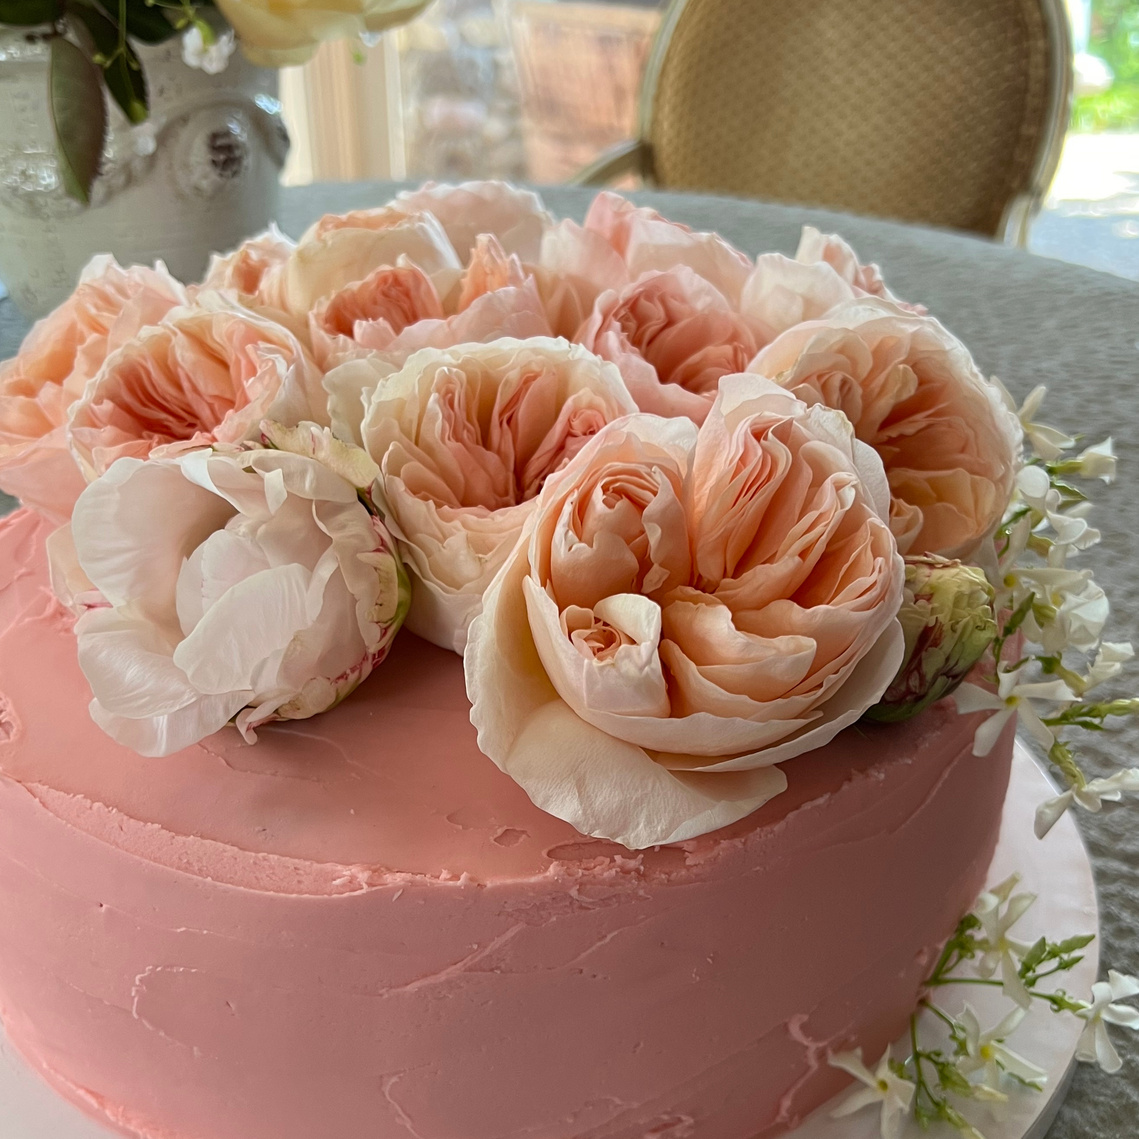 A pink cake for a baby girl shower in Malibu.